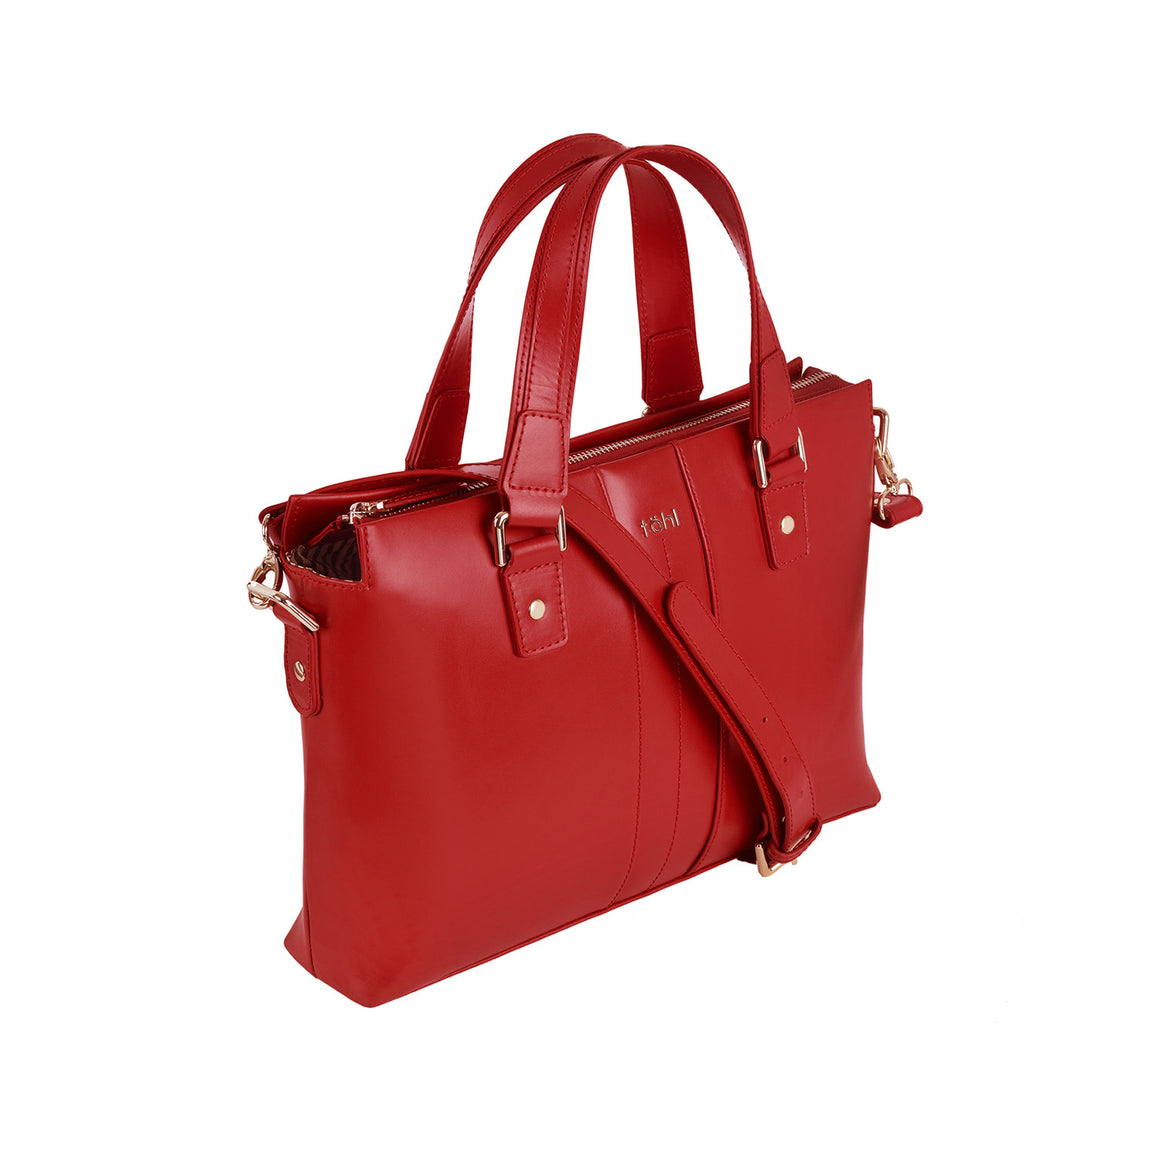 WORTH WOMEN'S VALISE - SPICE RED